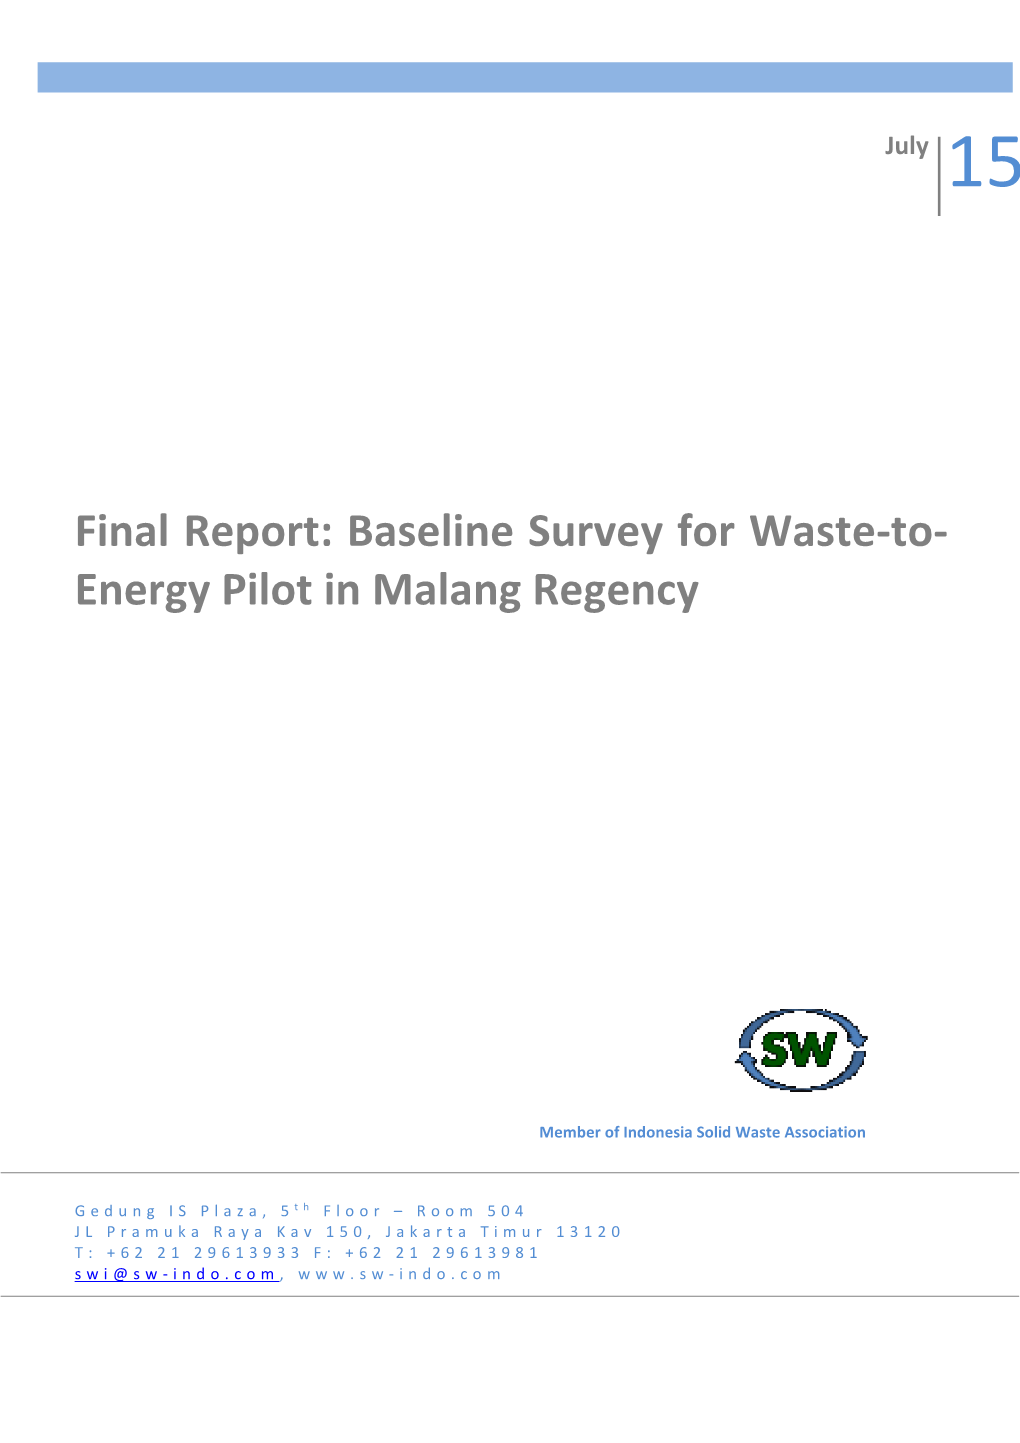 Final Report: Baseline Survey for Waste-To- Energy Pilot in Malang